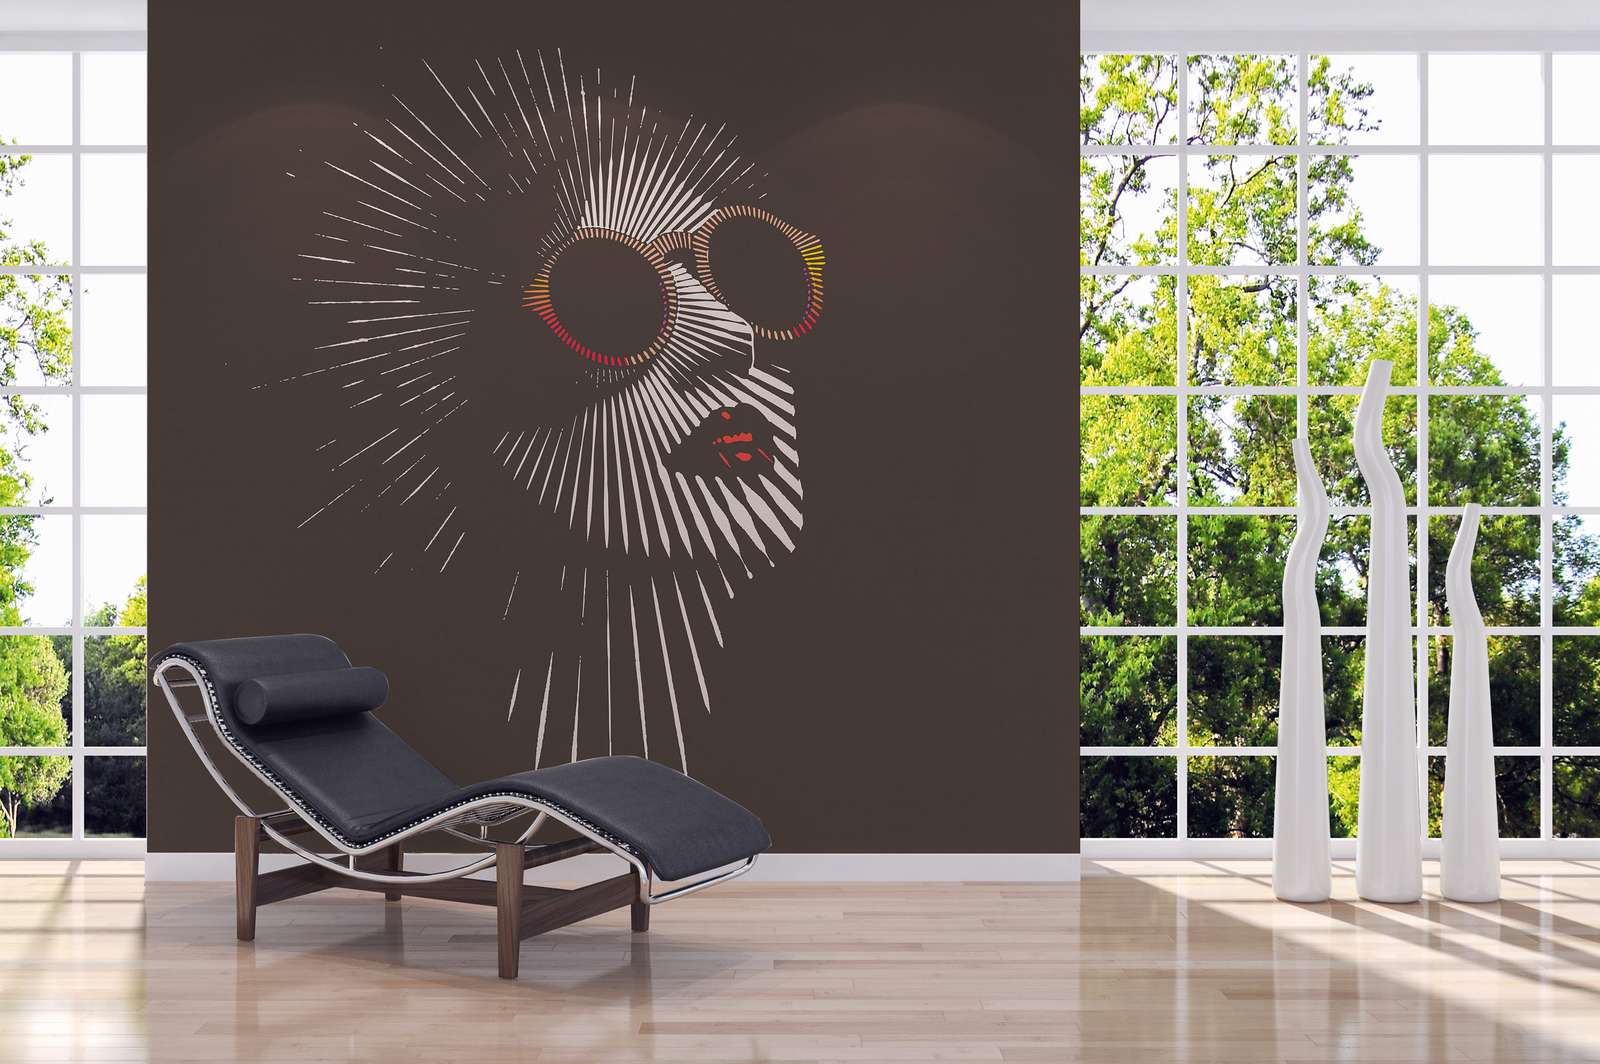             Stroke Pattern Wallpaper Woman with Sunglasses - Grey, Colourful
        